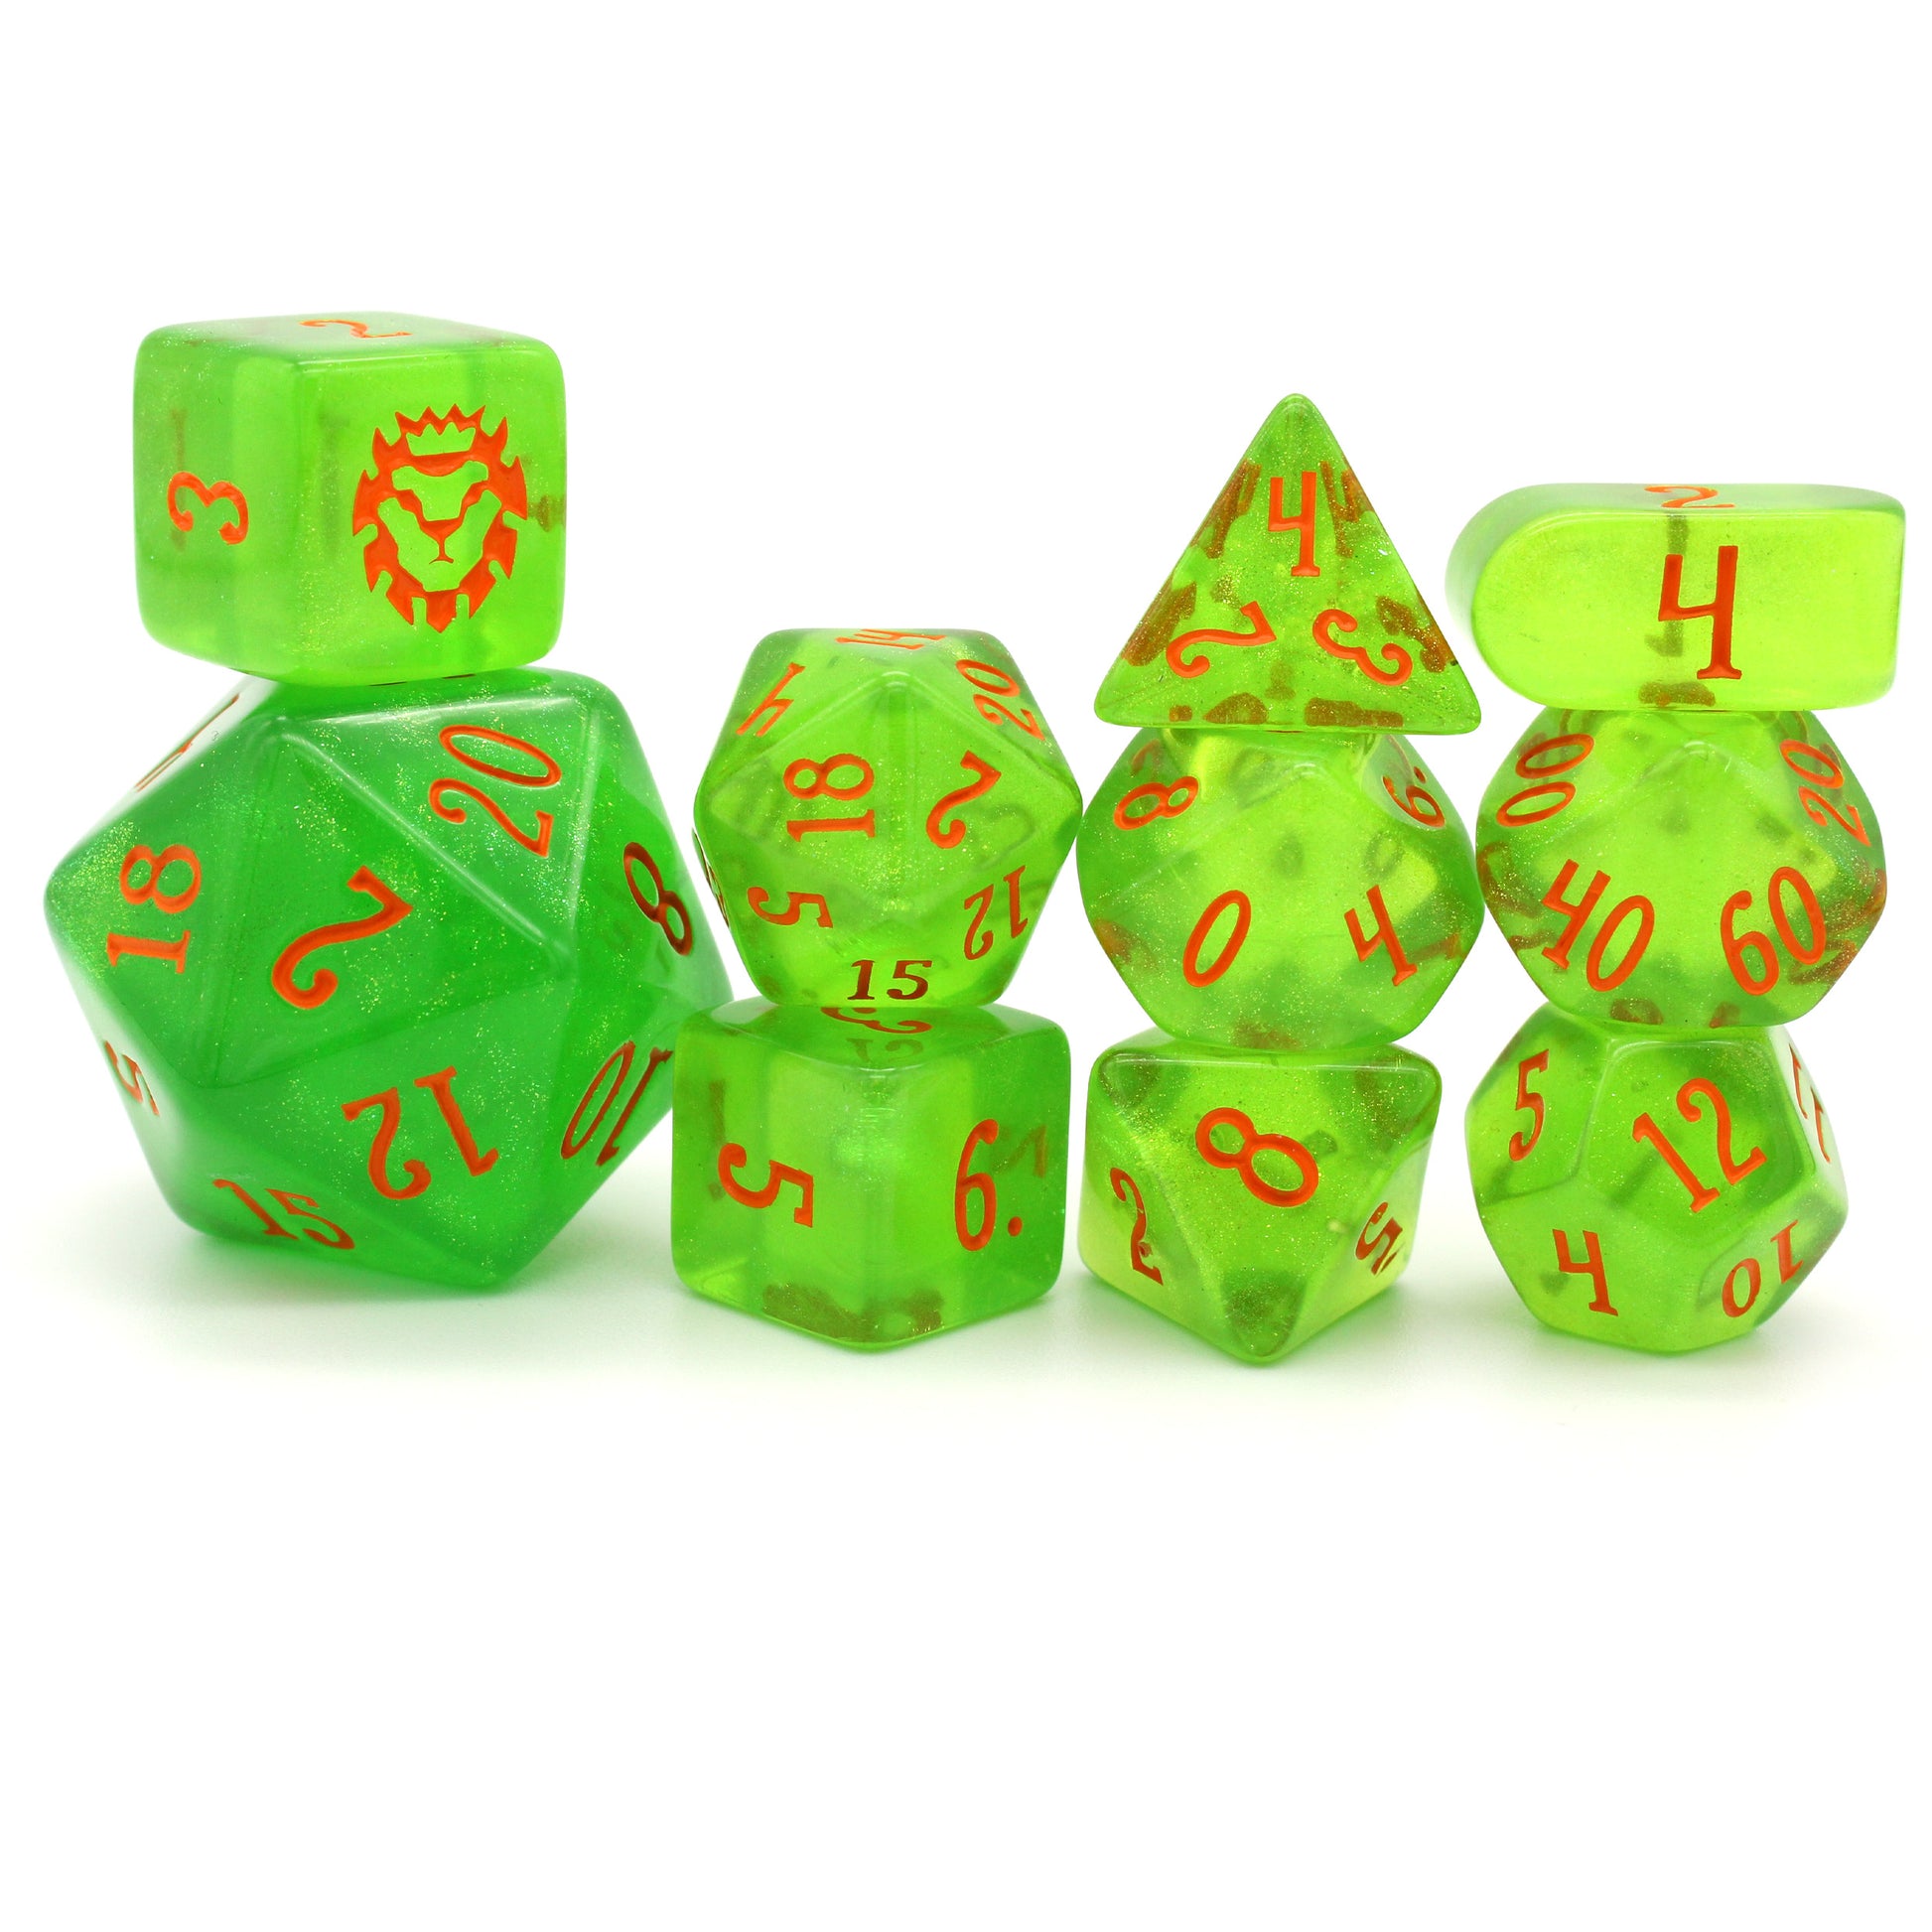 A 10-piece set of transparent green dice filled with micro glitter and inked in orange.